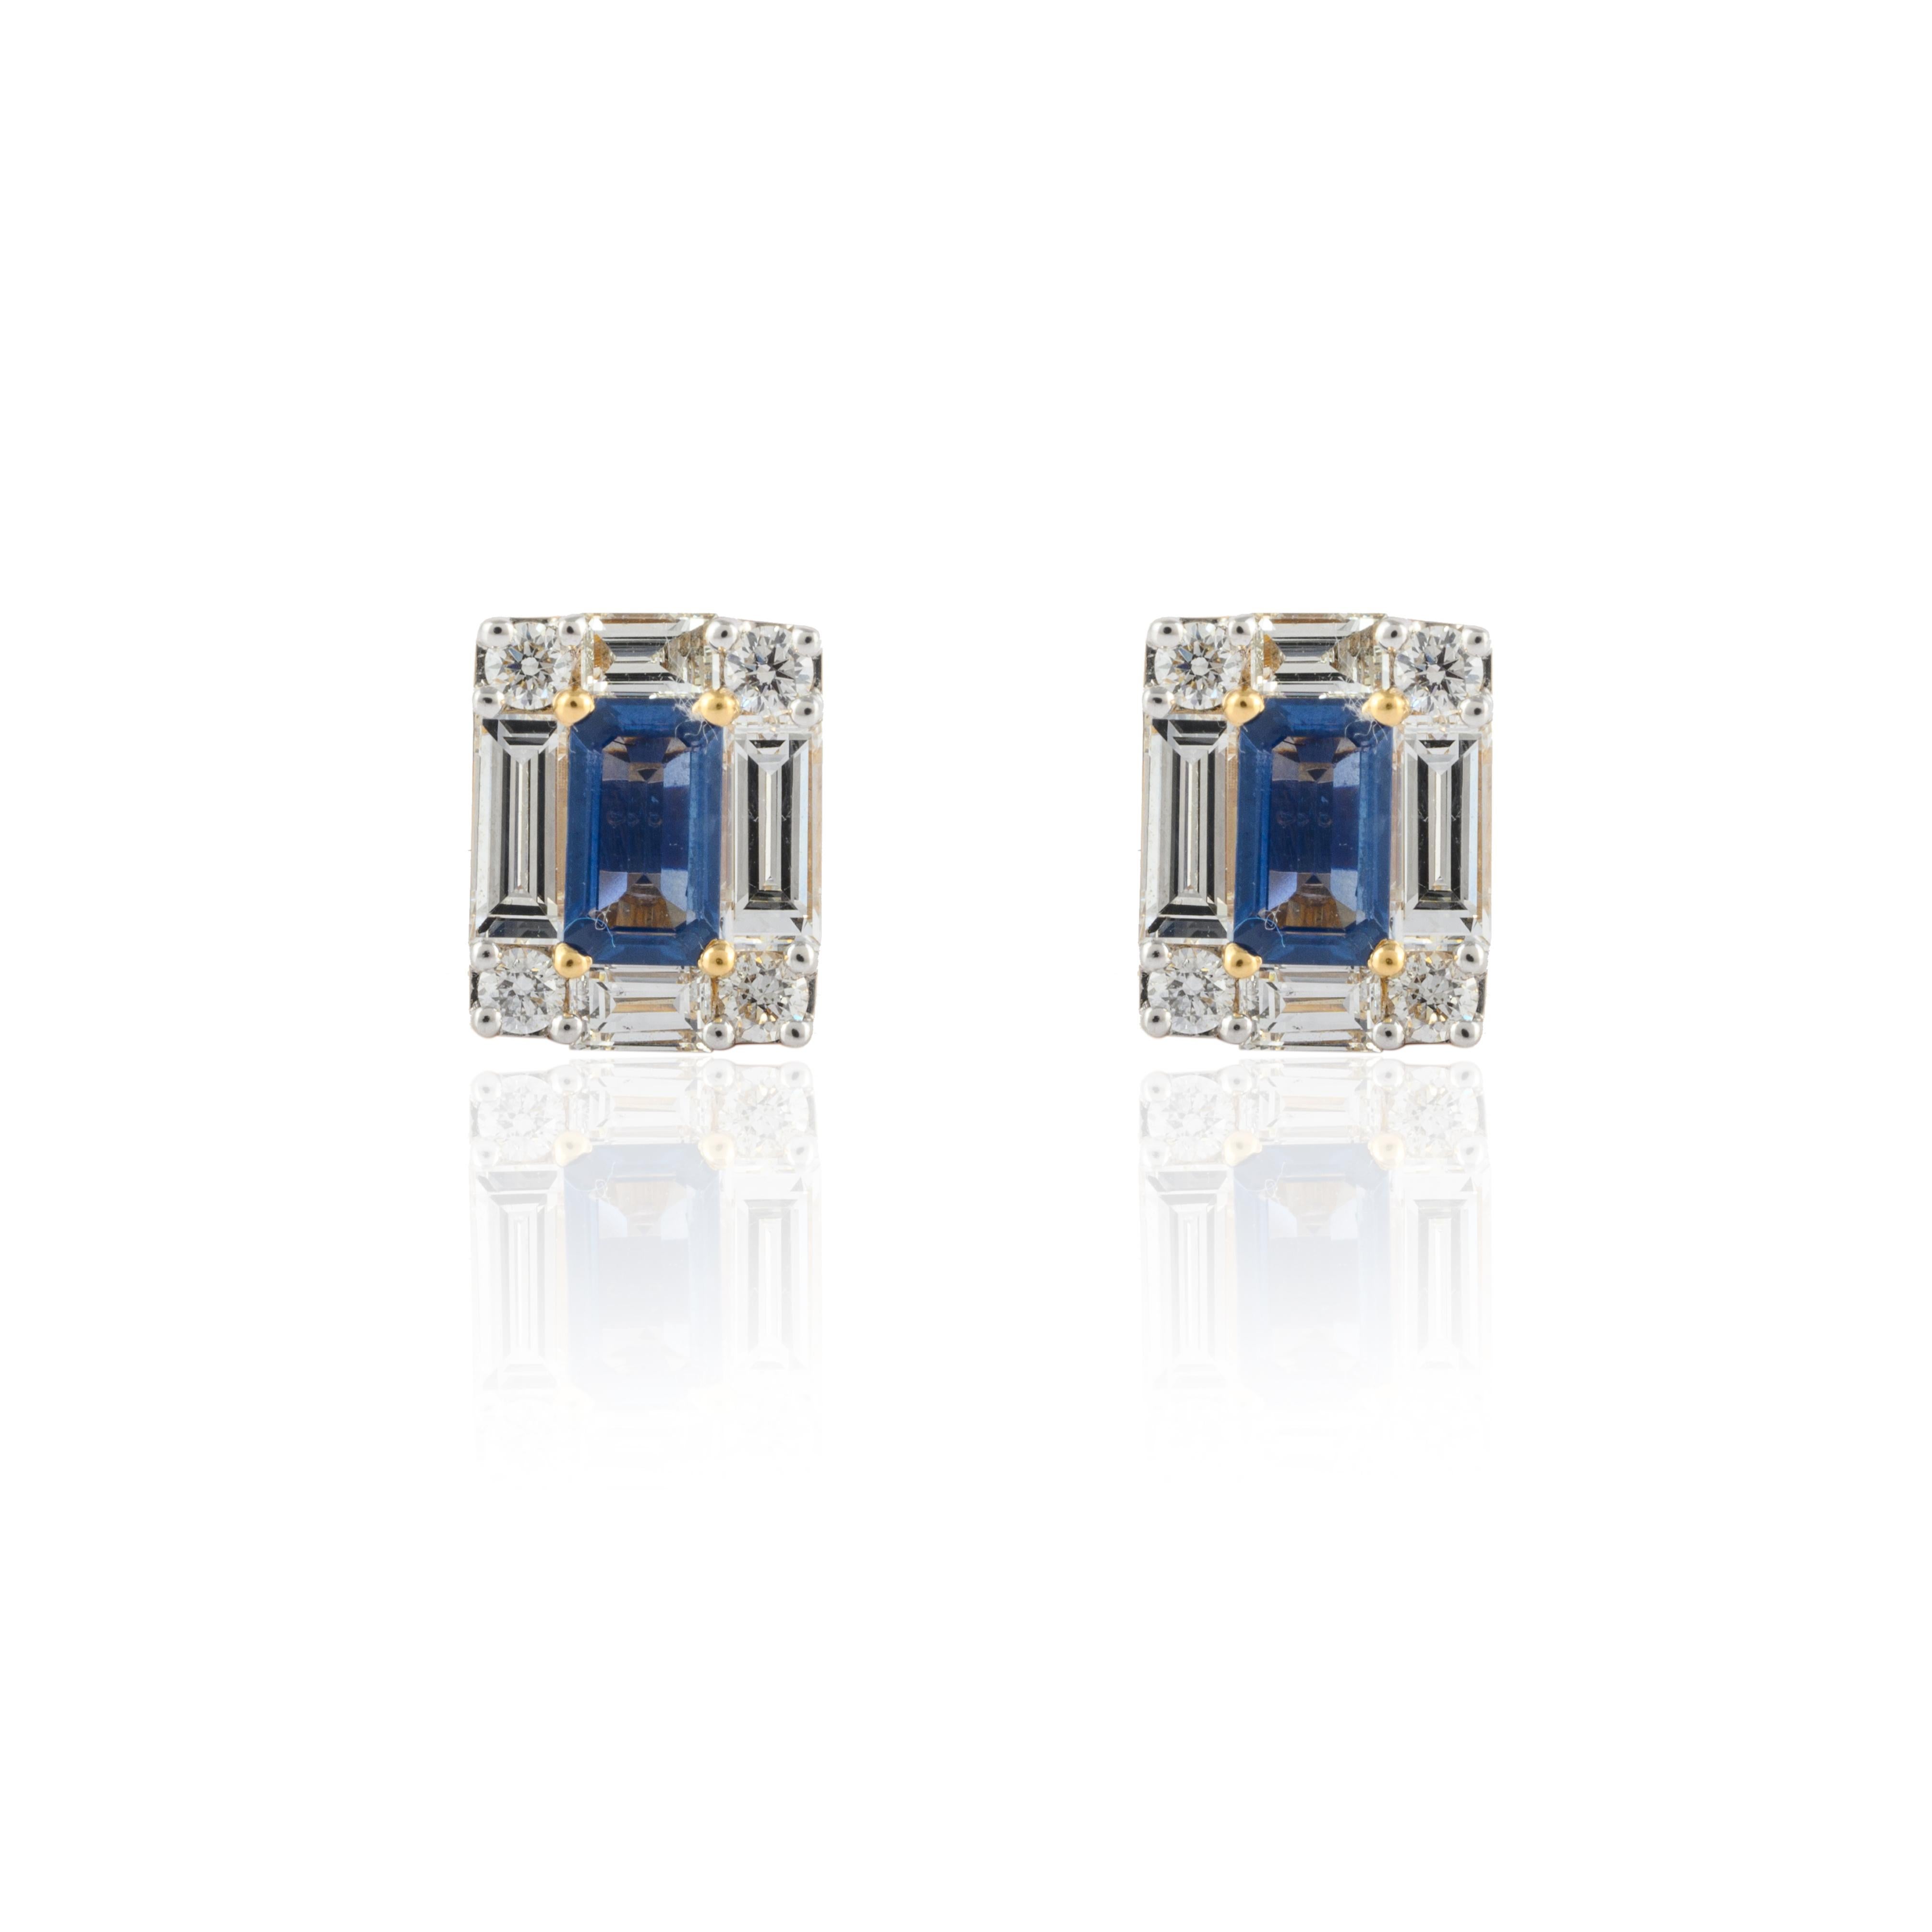 Dainty Diamond Sapphire Stud Earrings in 18K Gold to make a statement with your look. You shall need small stud earrings to make a statement with your look. These earrings create a sparkling, luxurious look featuring baguette cut sapphire.
Sapphire